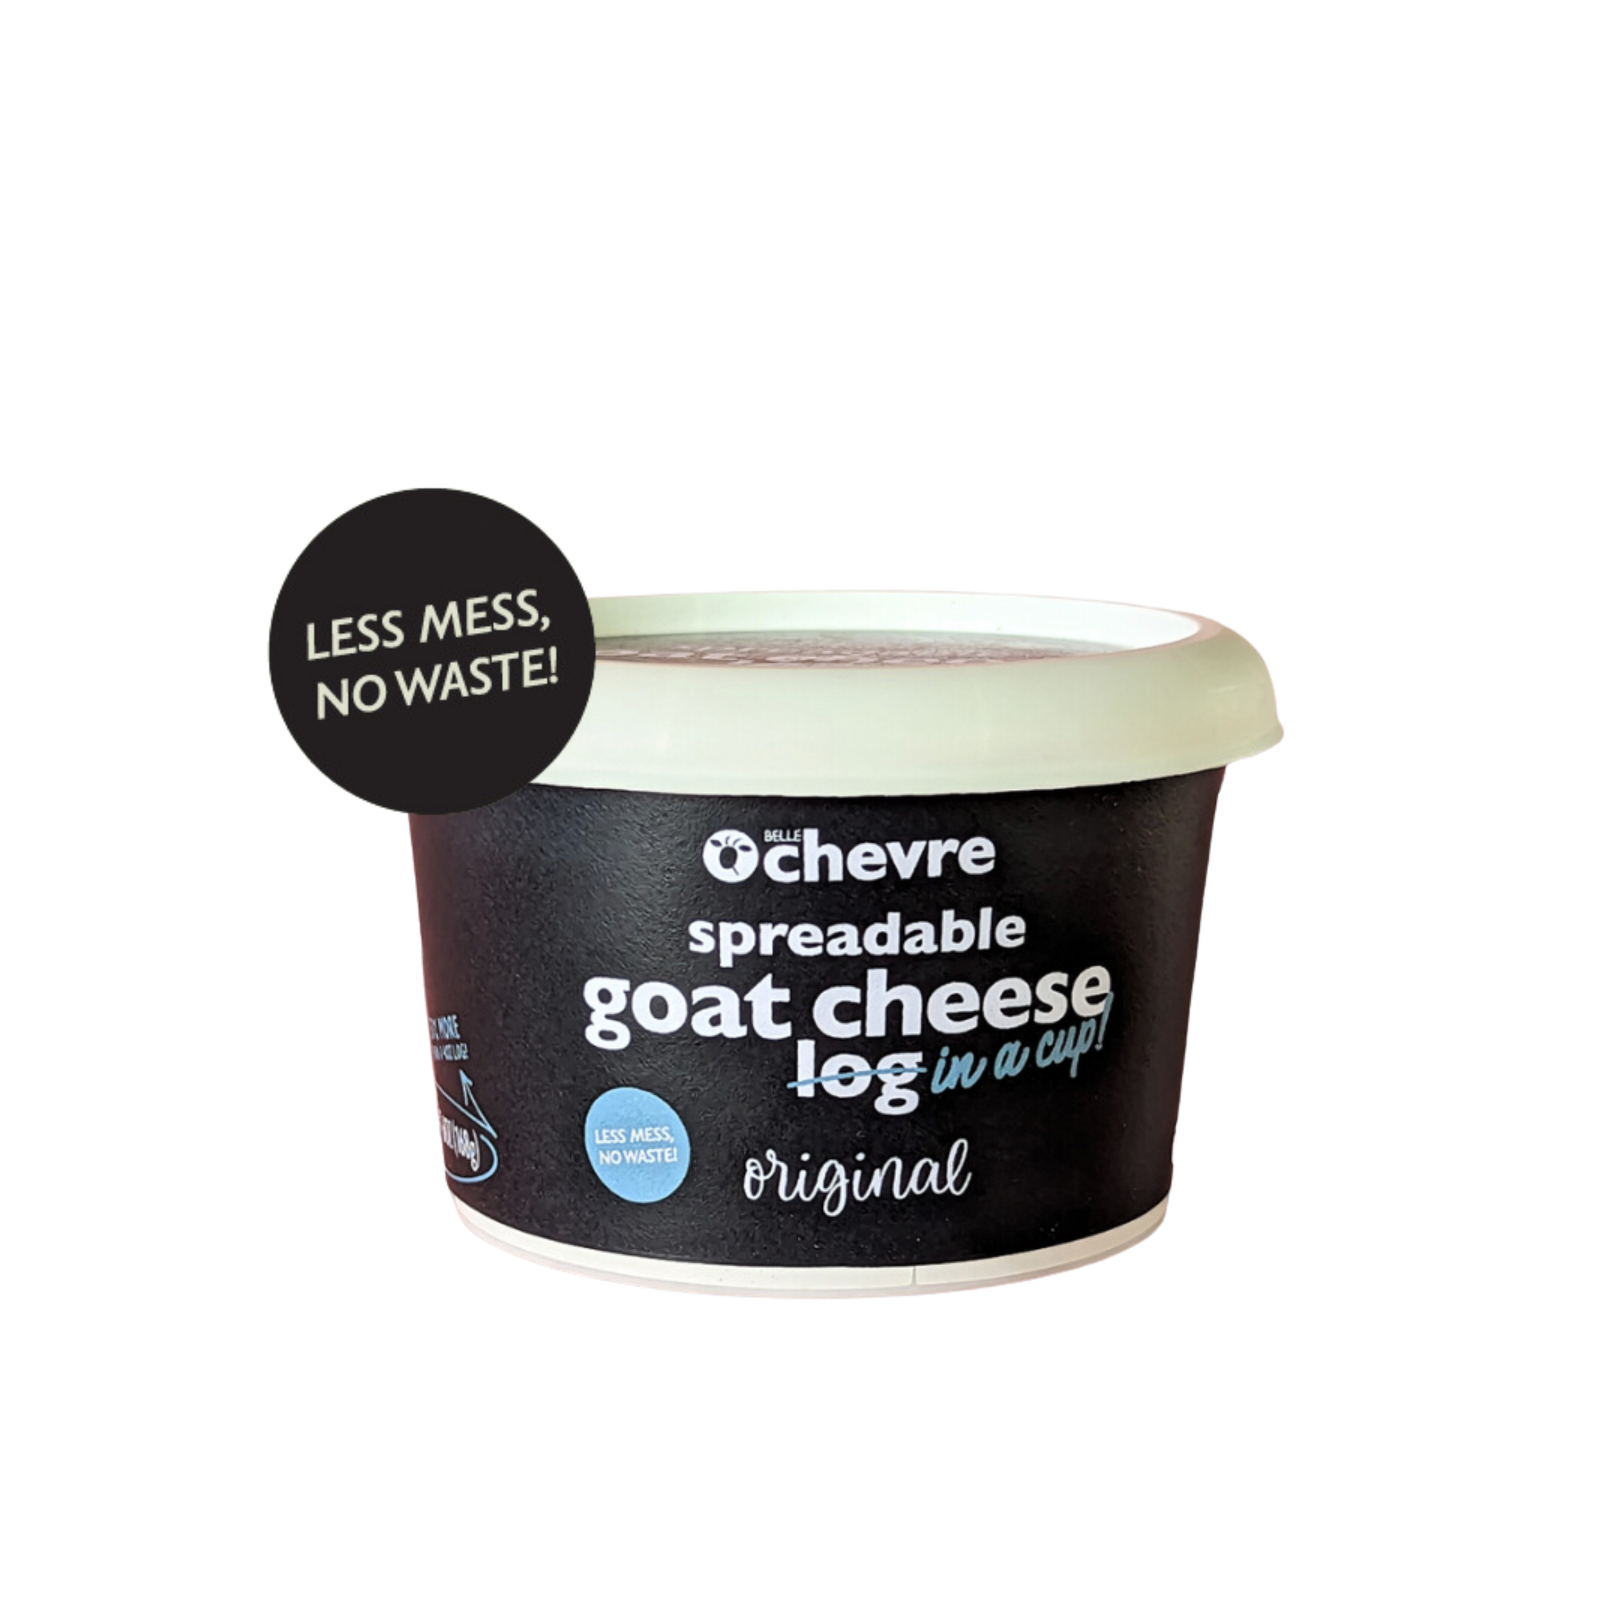 Belle Chevre Spreadable Goat Cheese Log in a Cup - Original